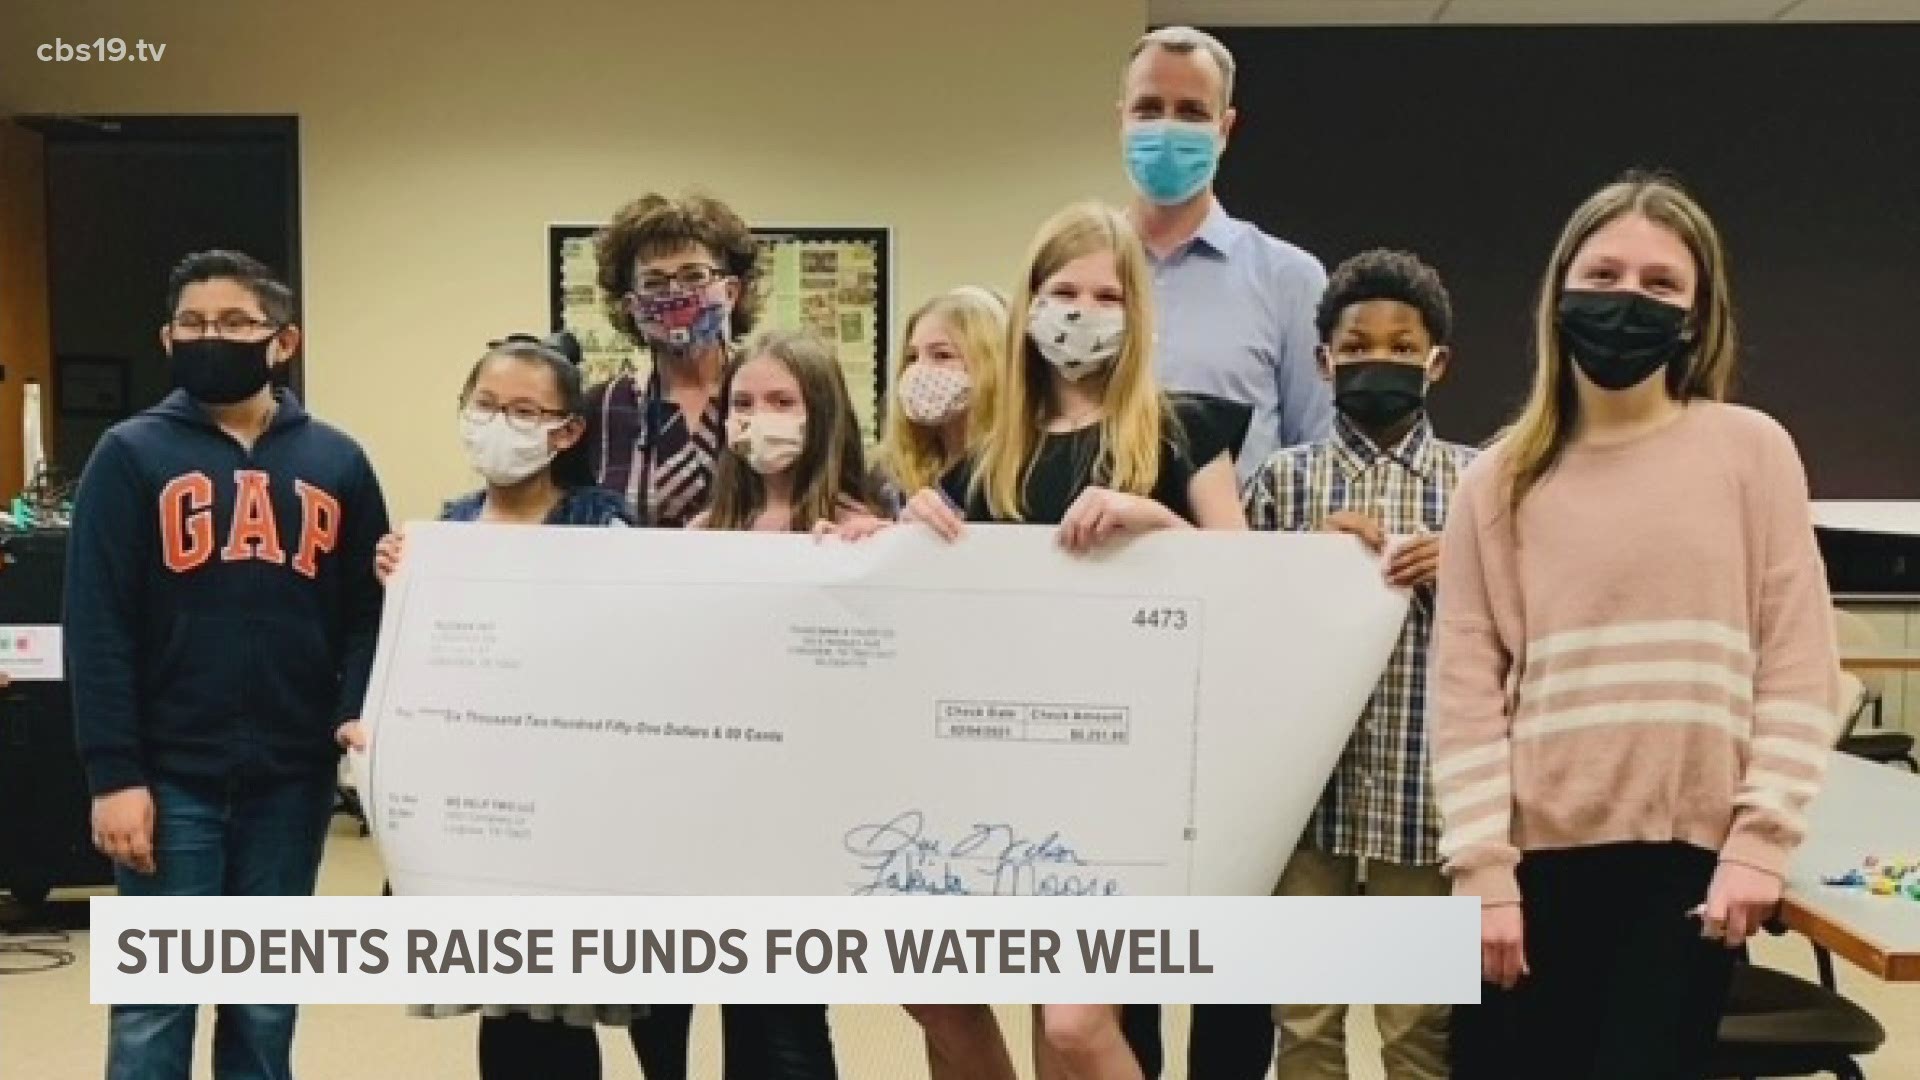 Students at Hudson PEP raised funds for a water well systems for students and a community in Uganda.